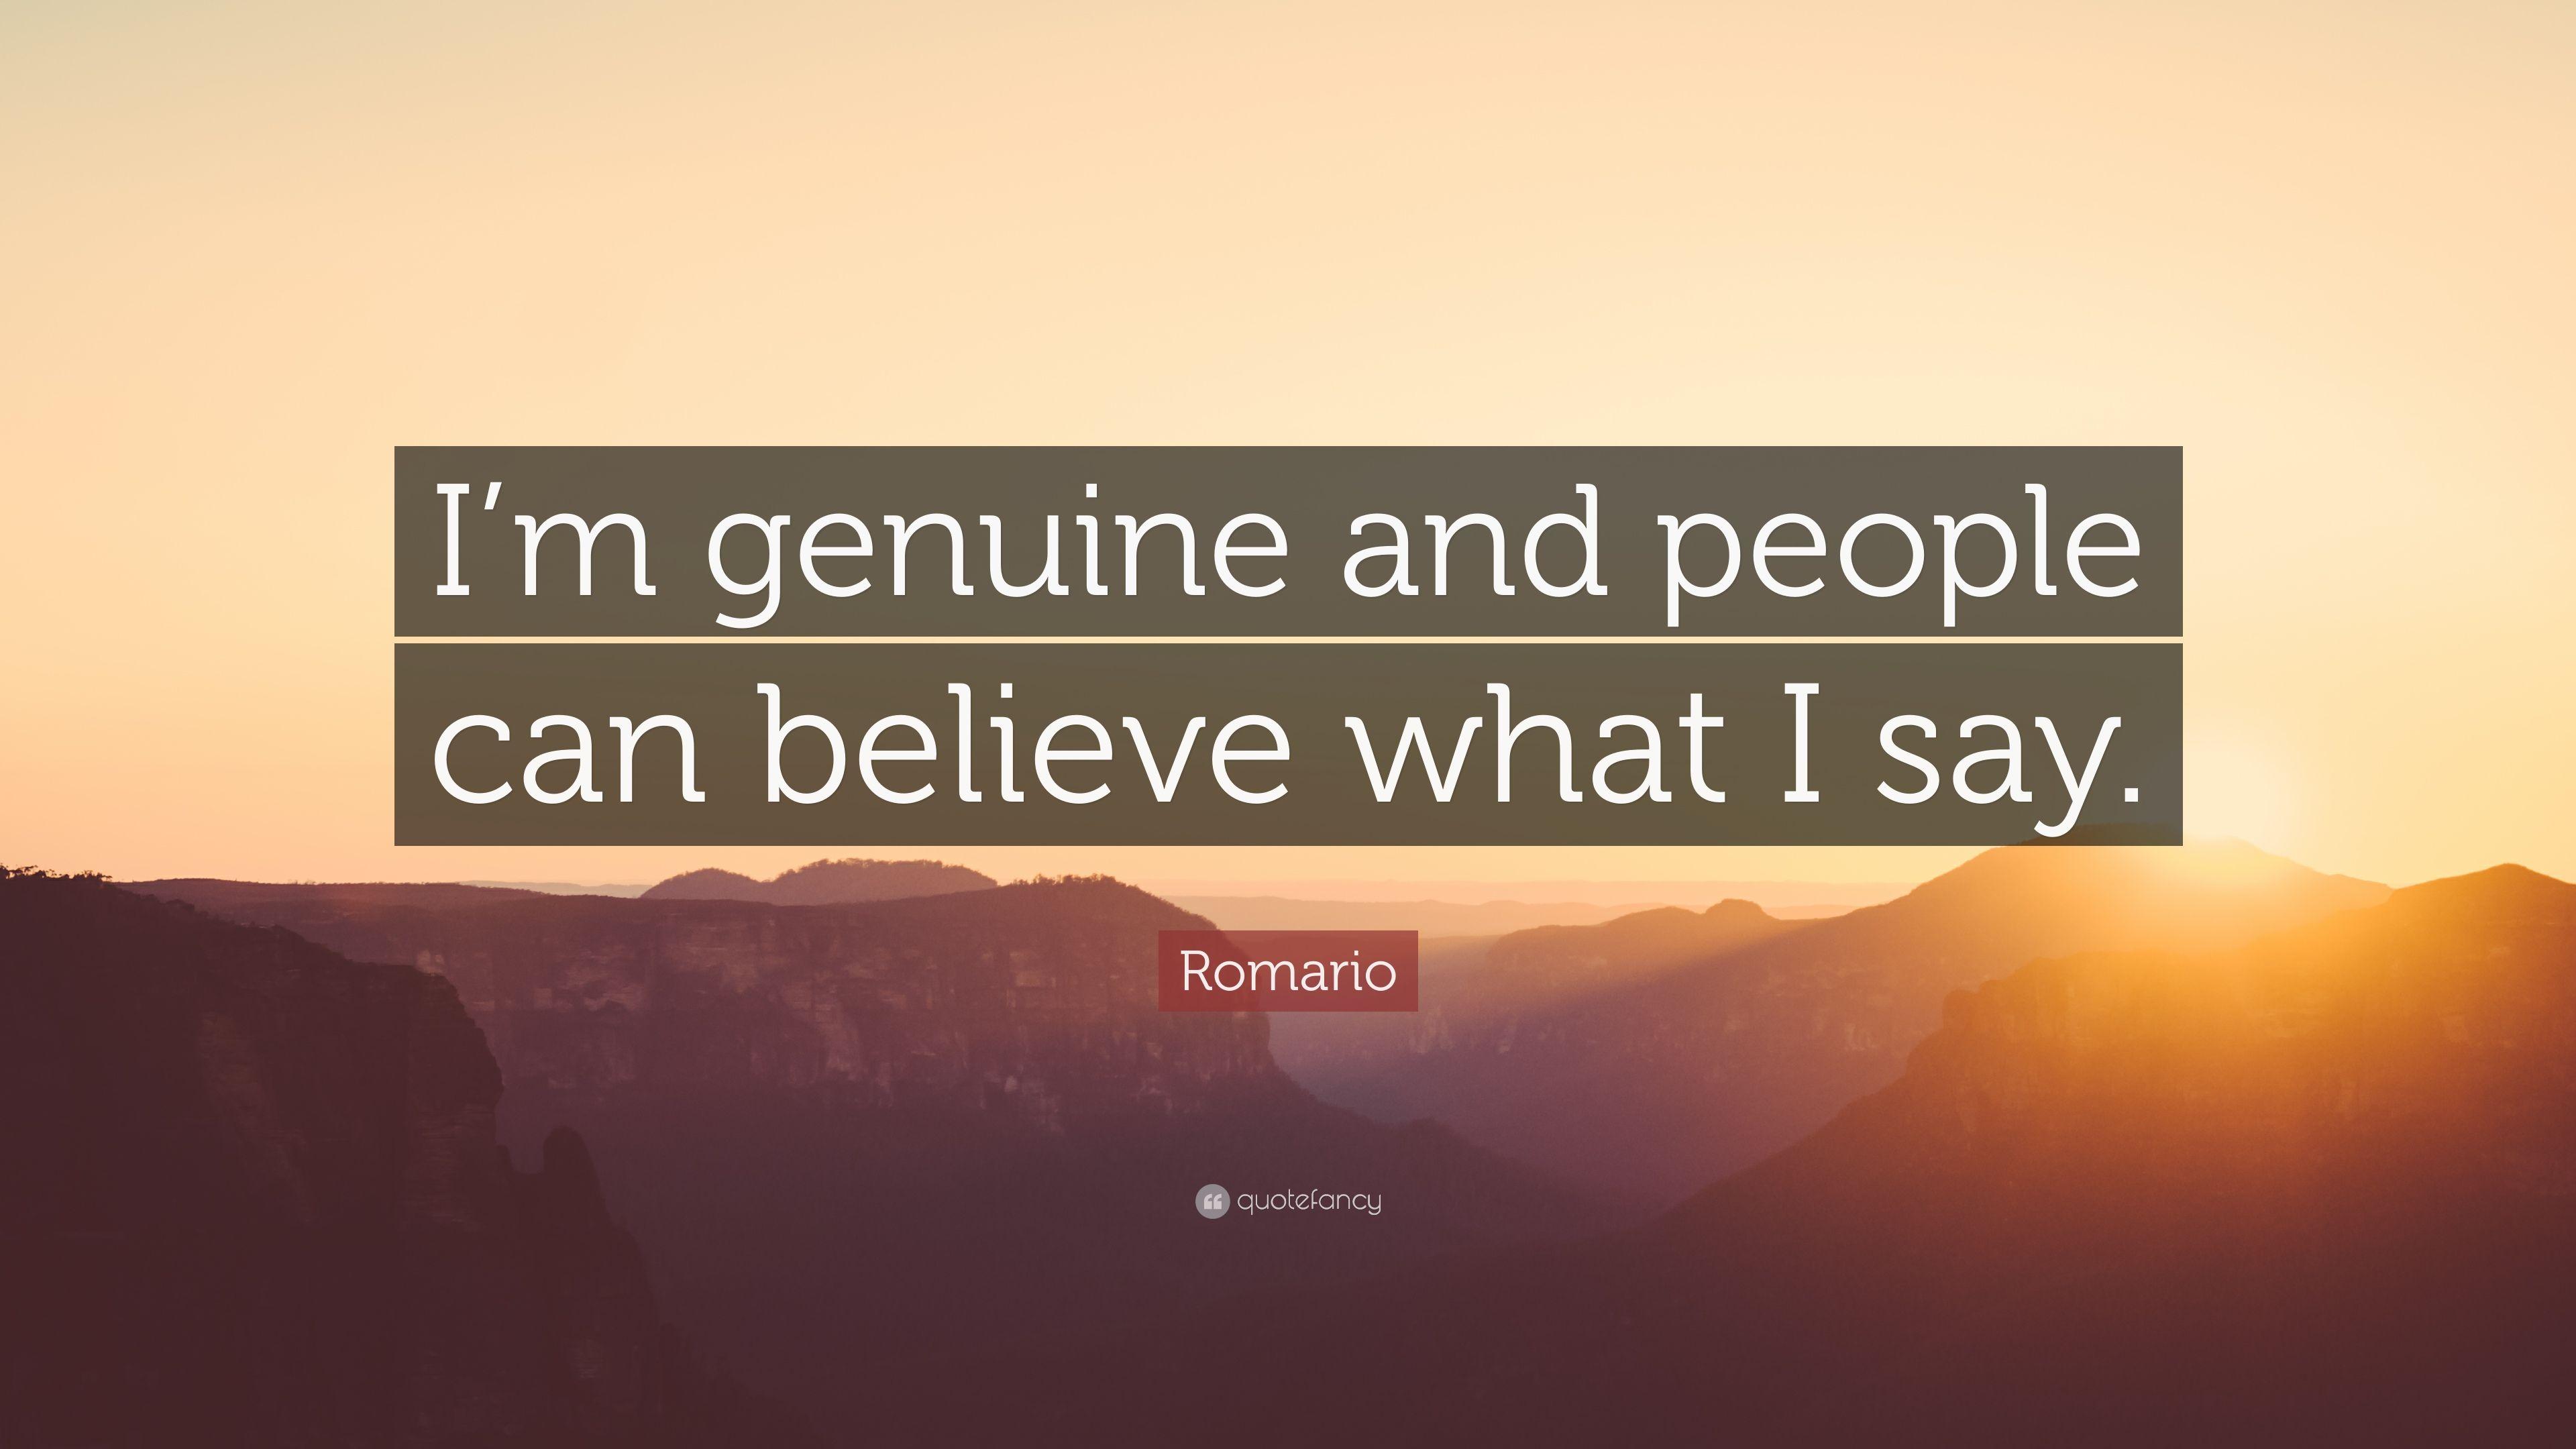 Romario Quote: “I'm genuine and people can believe what I say.” 7